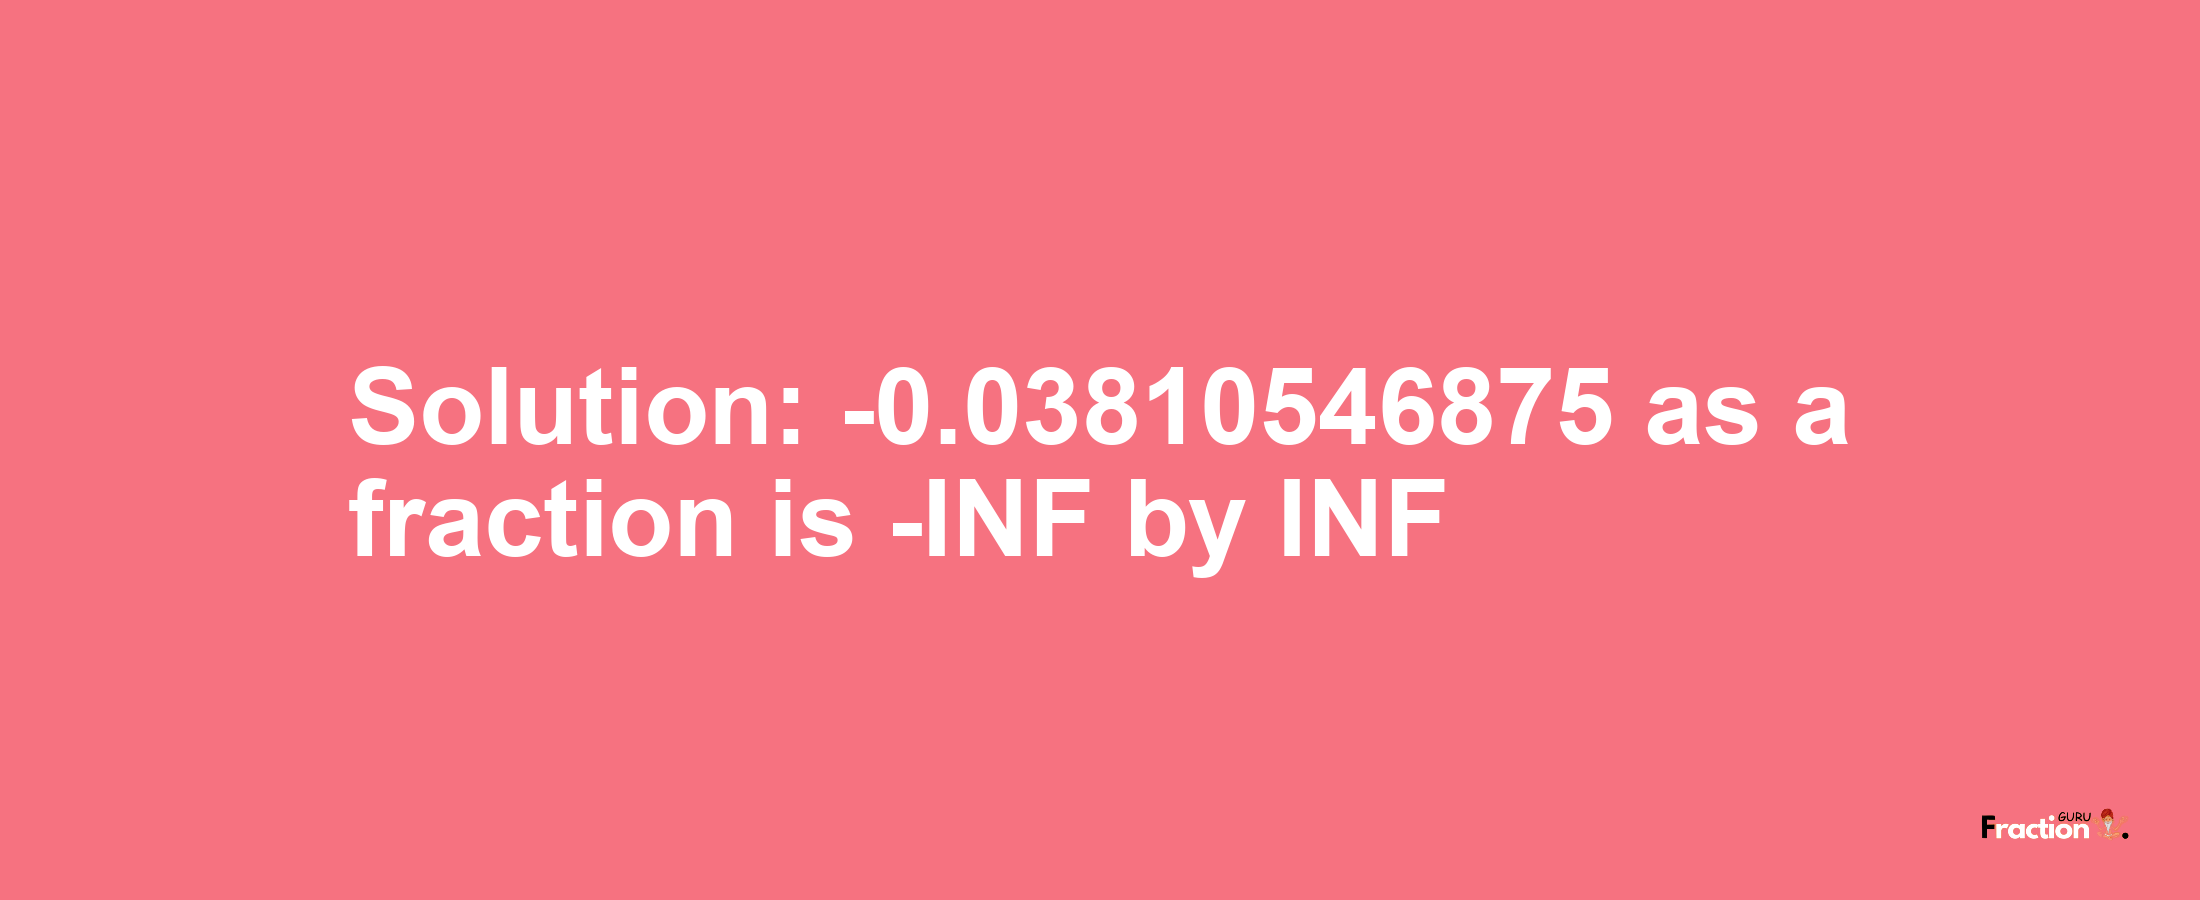 Solution:-0.03810546875 as a fraction is -INF/INF